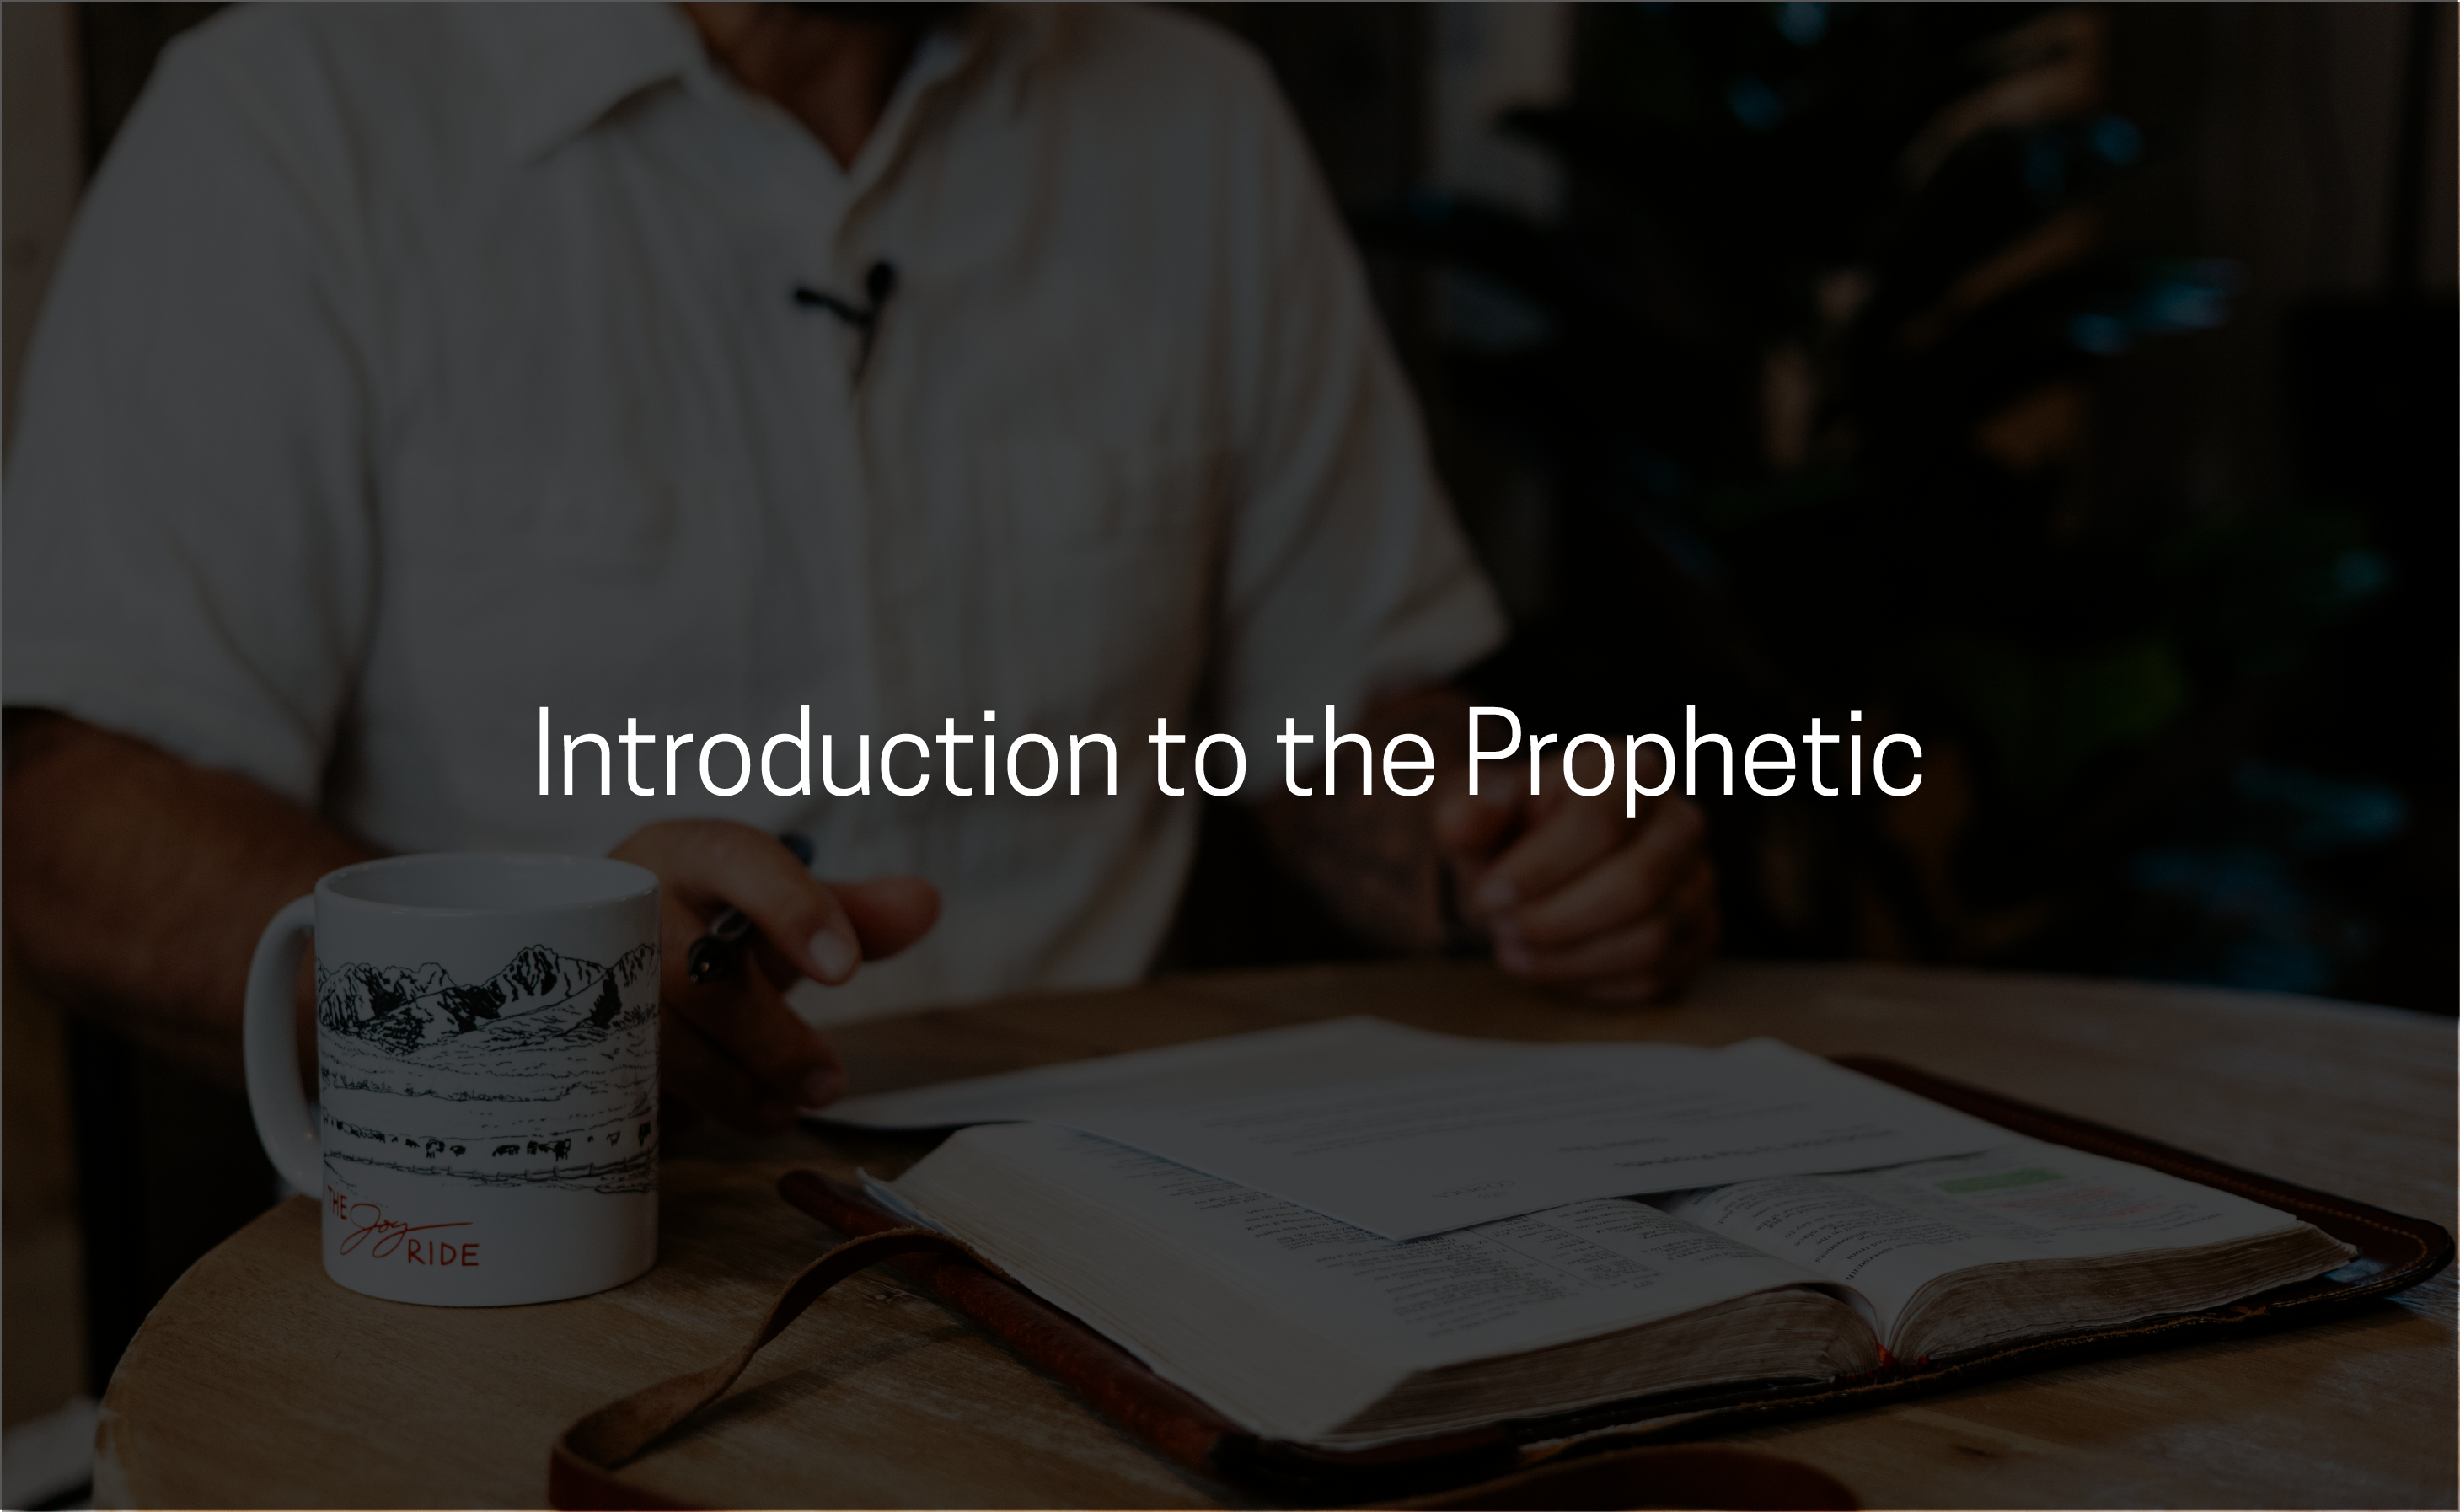 Introduction to the Prophetic | eCourse